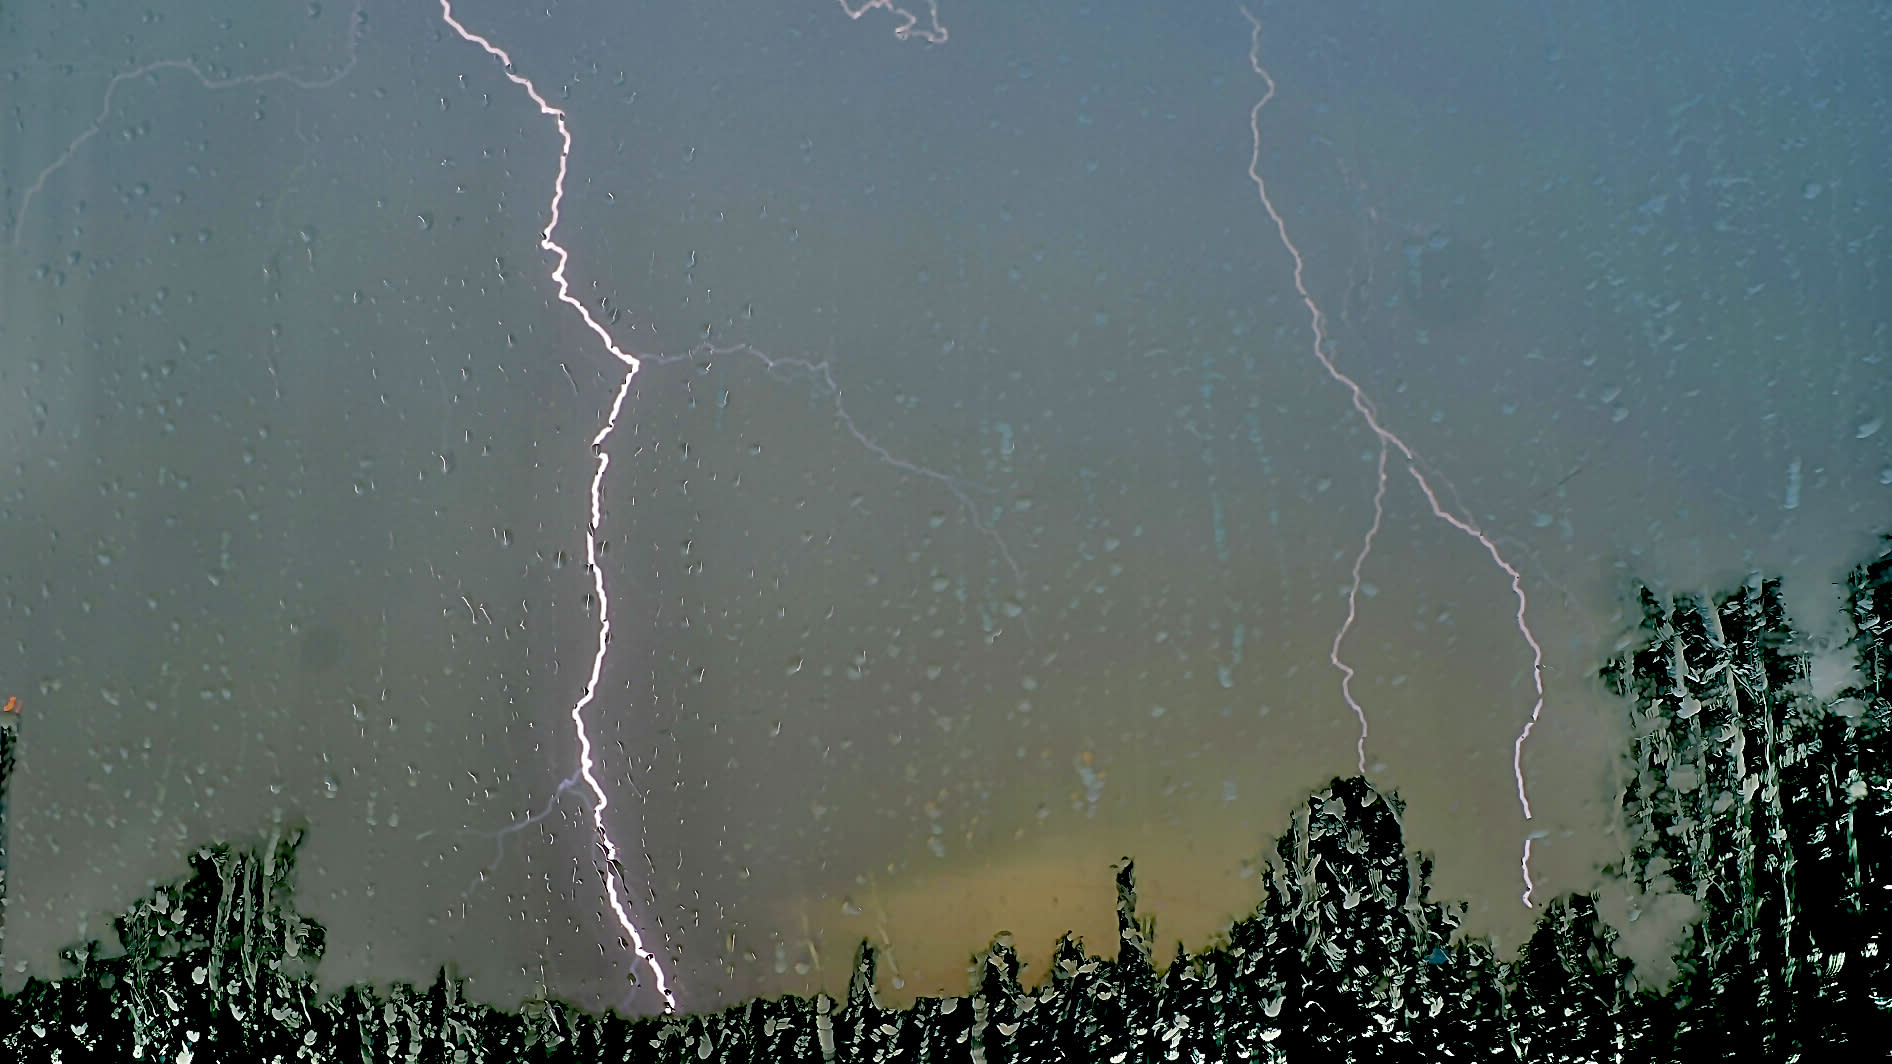 The Finnish Meteorological Institute gives Finland a severe thunderstorm